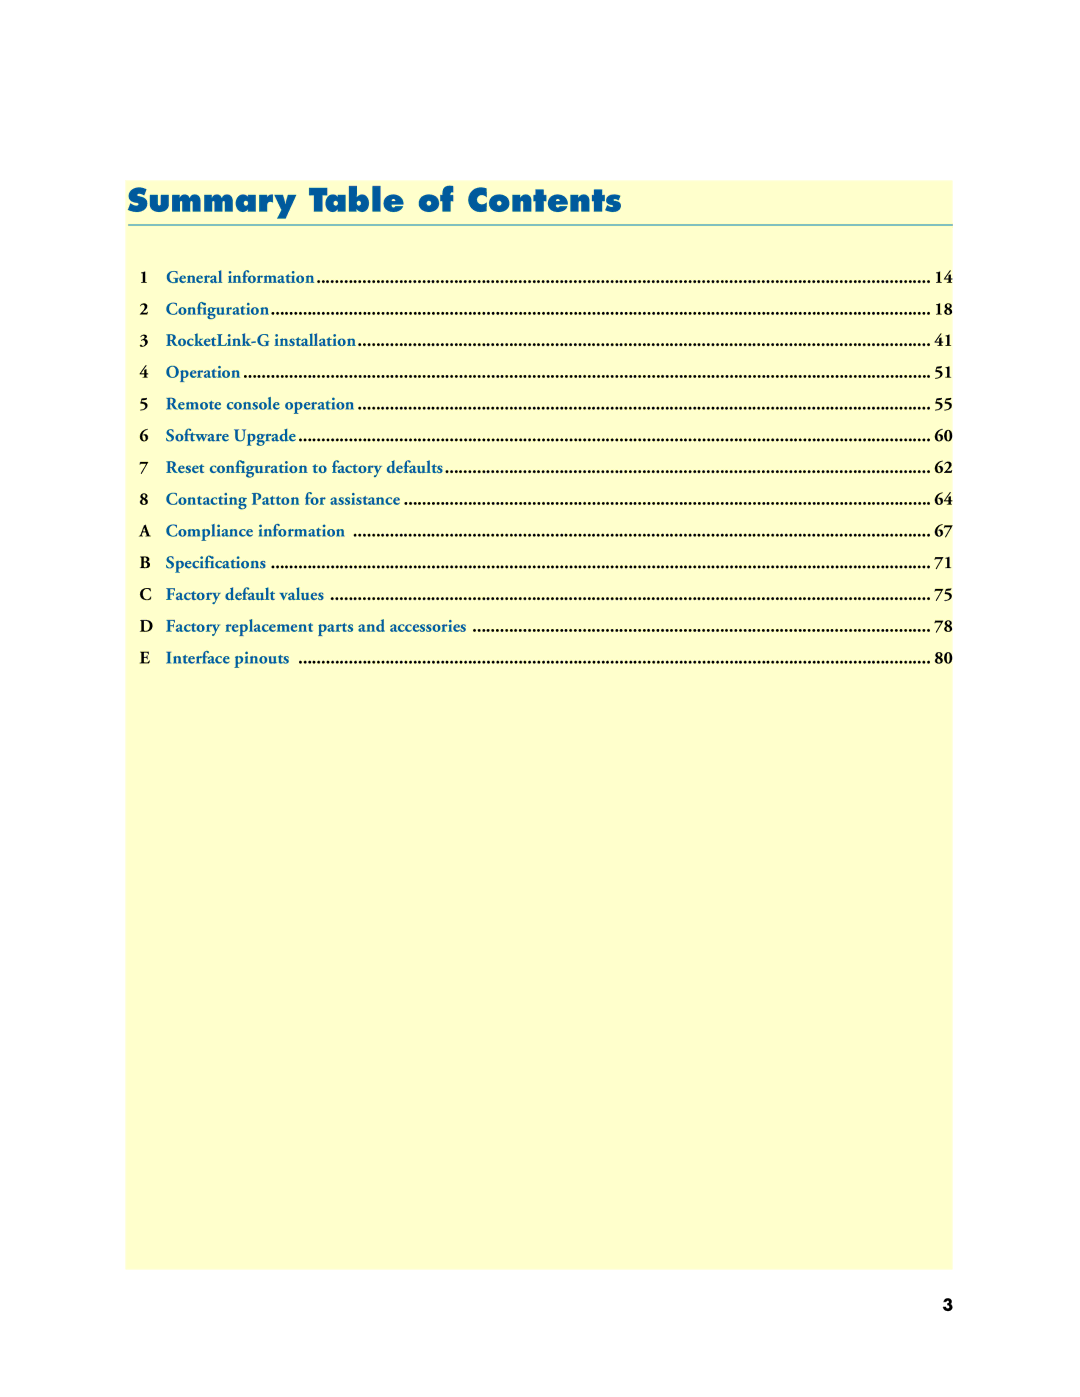 Patton electronic 3088 Series user manual Summary Table of Contents 